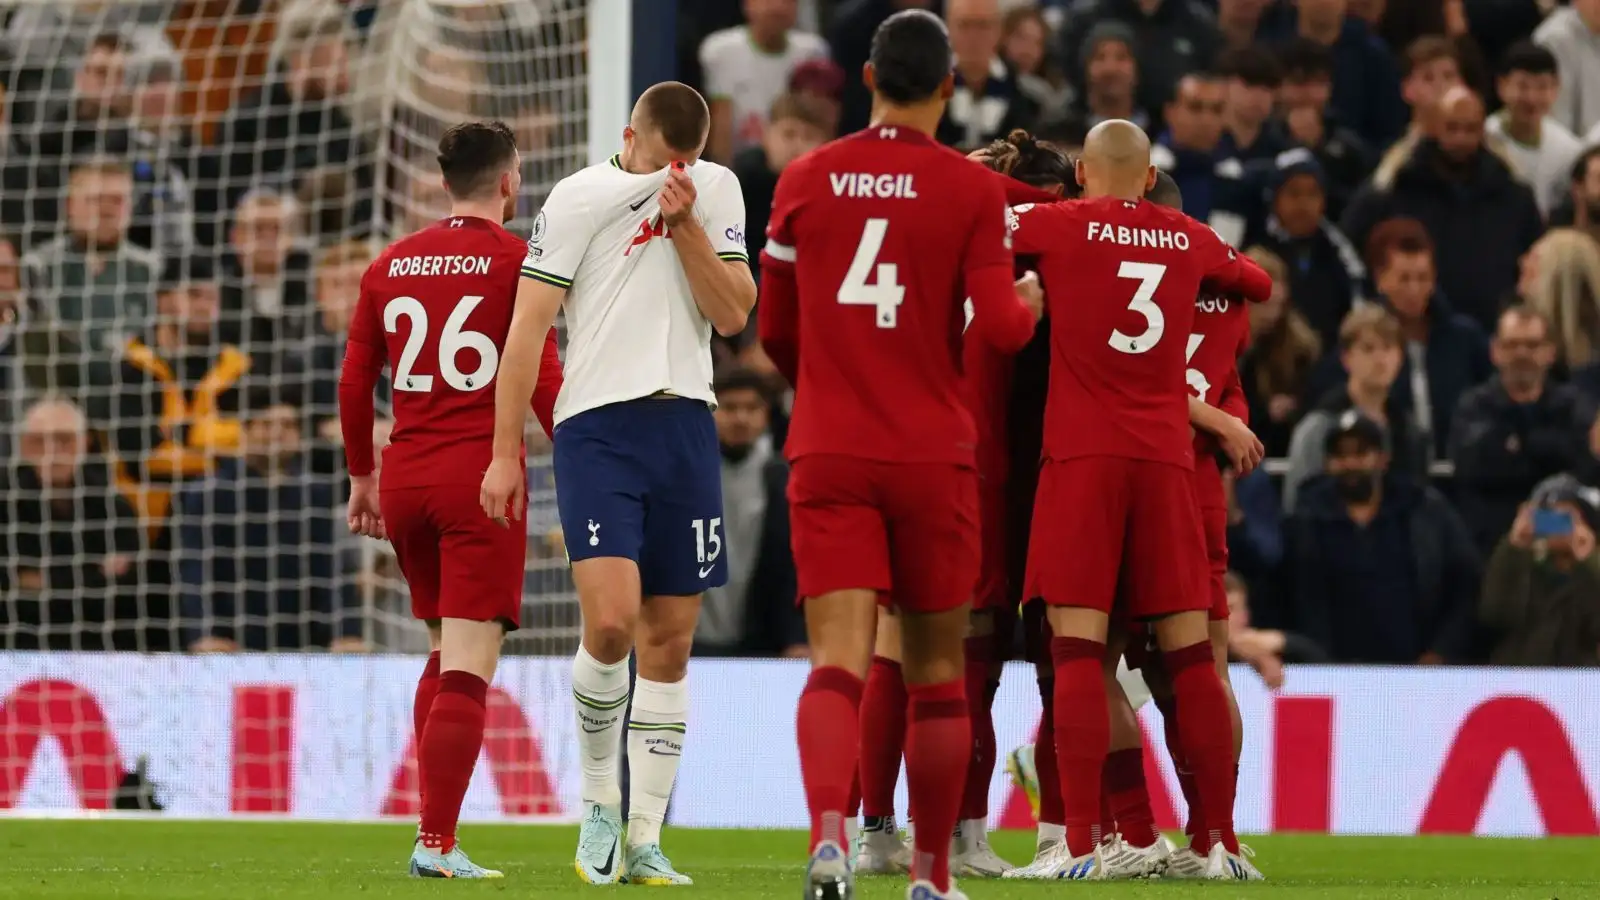 Eric Dier looks dejected after Mo Salah scores for Liverpool against Tottenham in the Premier League